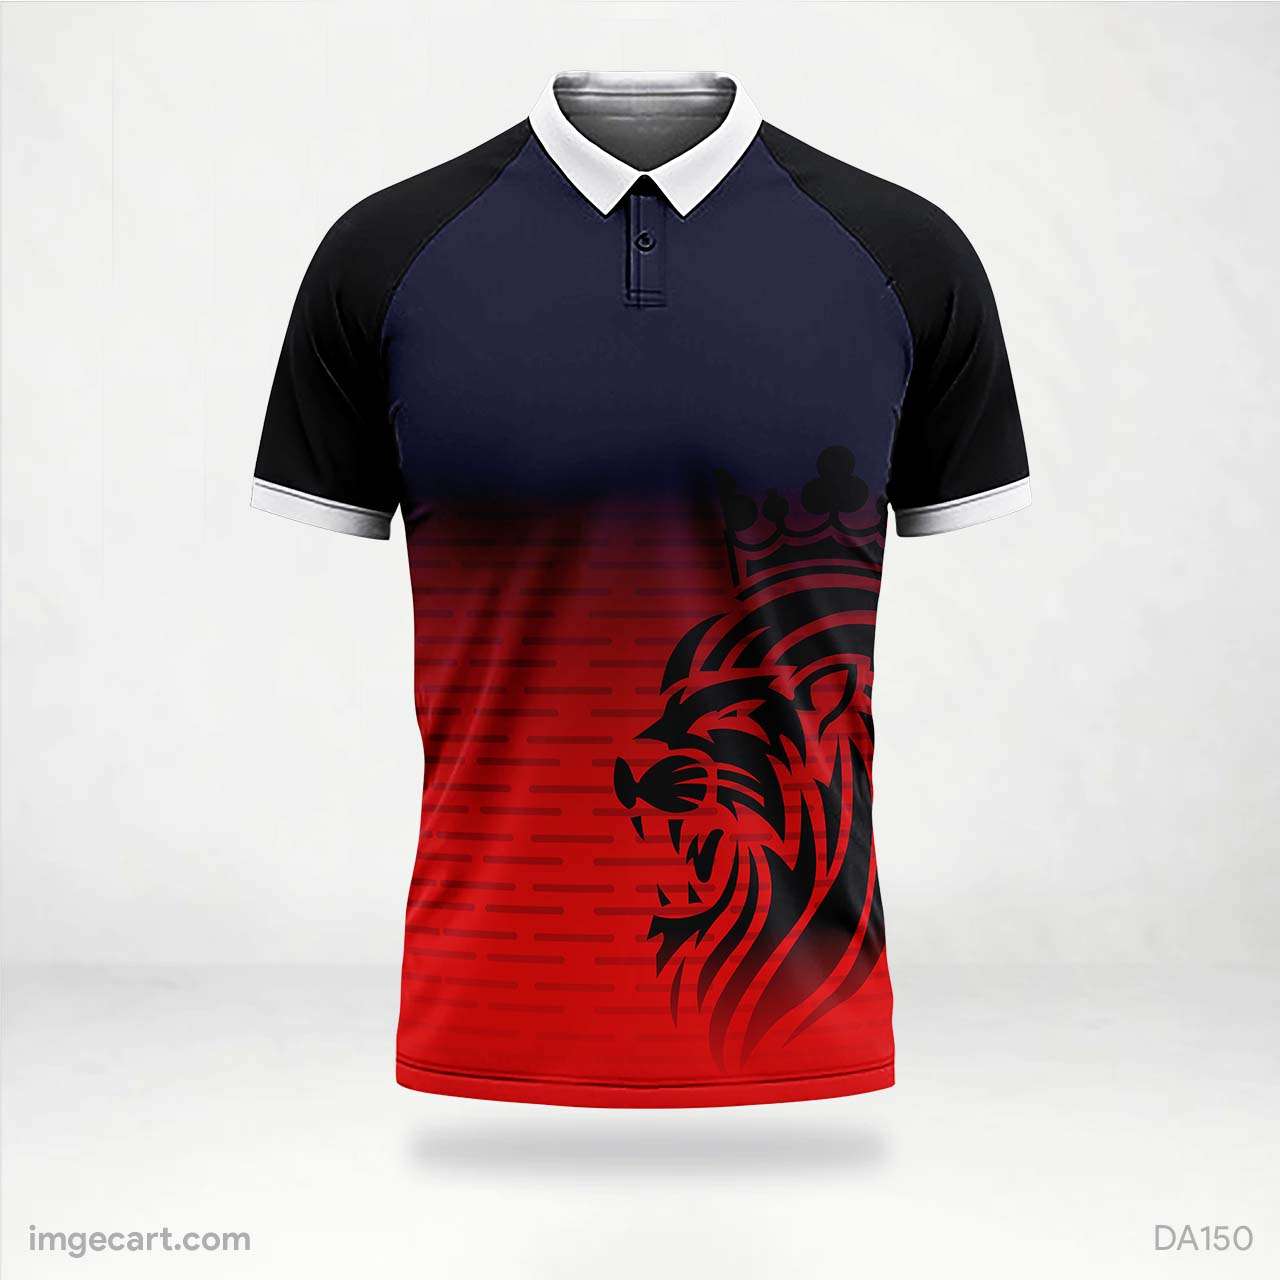 Cricket Jersey Design Black and Red with Lion Face - imgecart